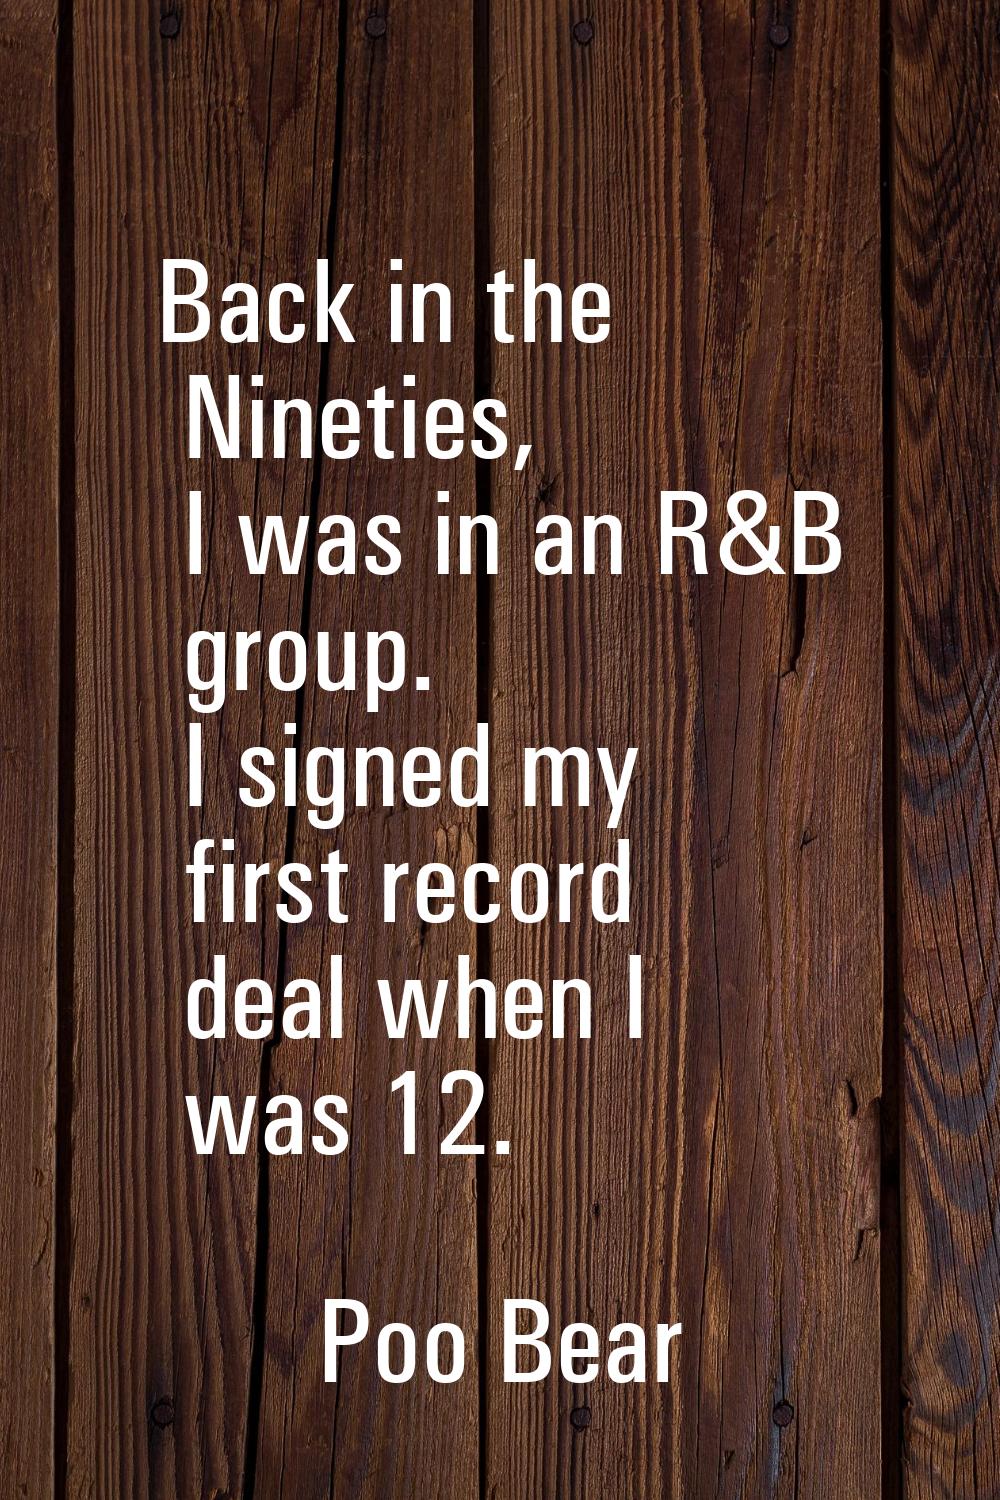 Back in the Nineties, I was in an R&B group. I signed my first record deal when I was 12.